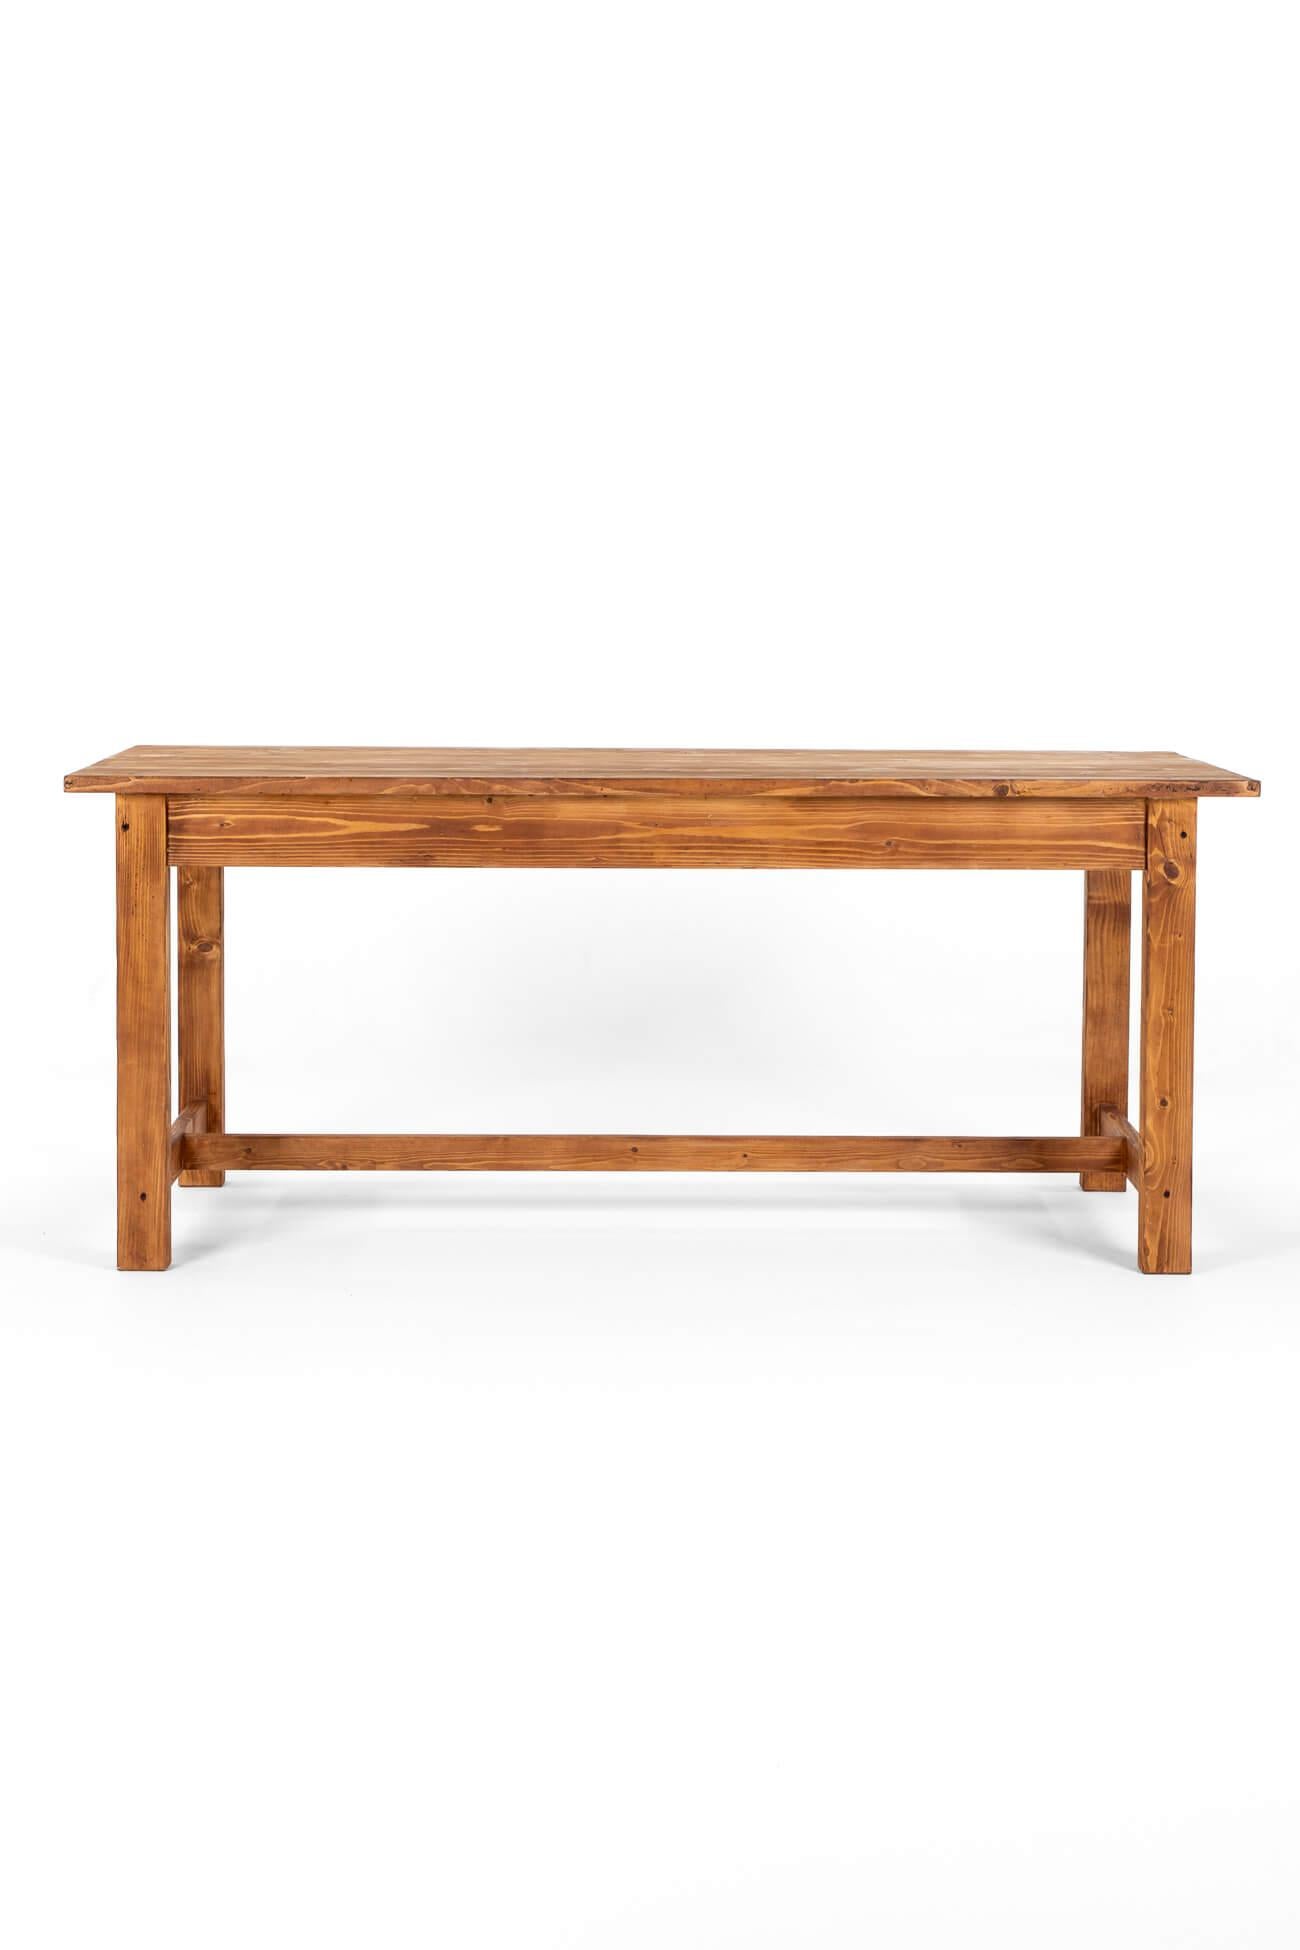 French Pine Farmhouse Table For Sale